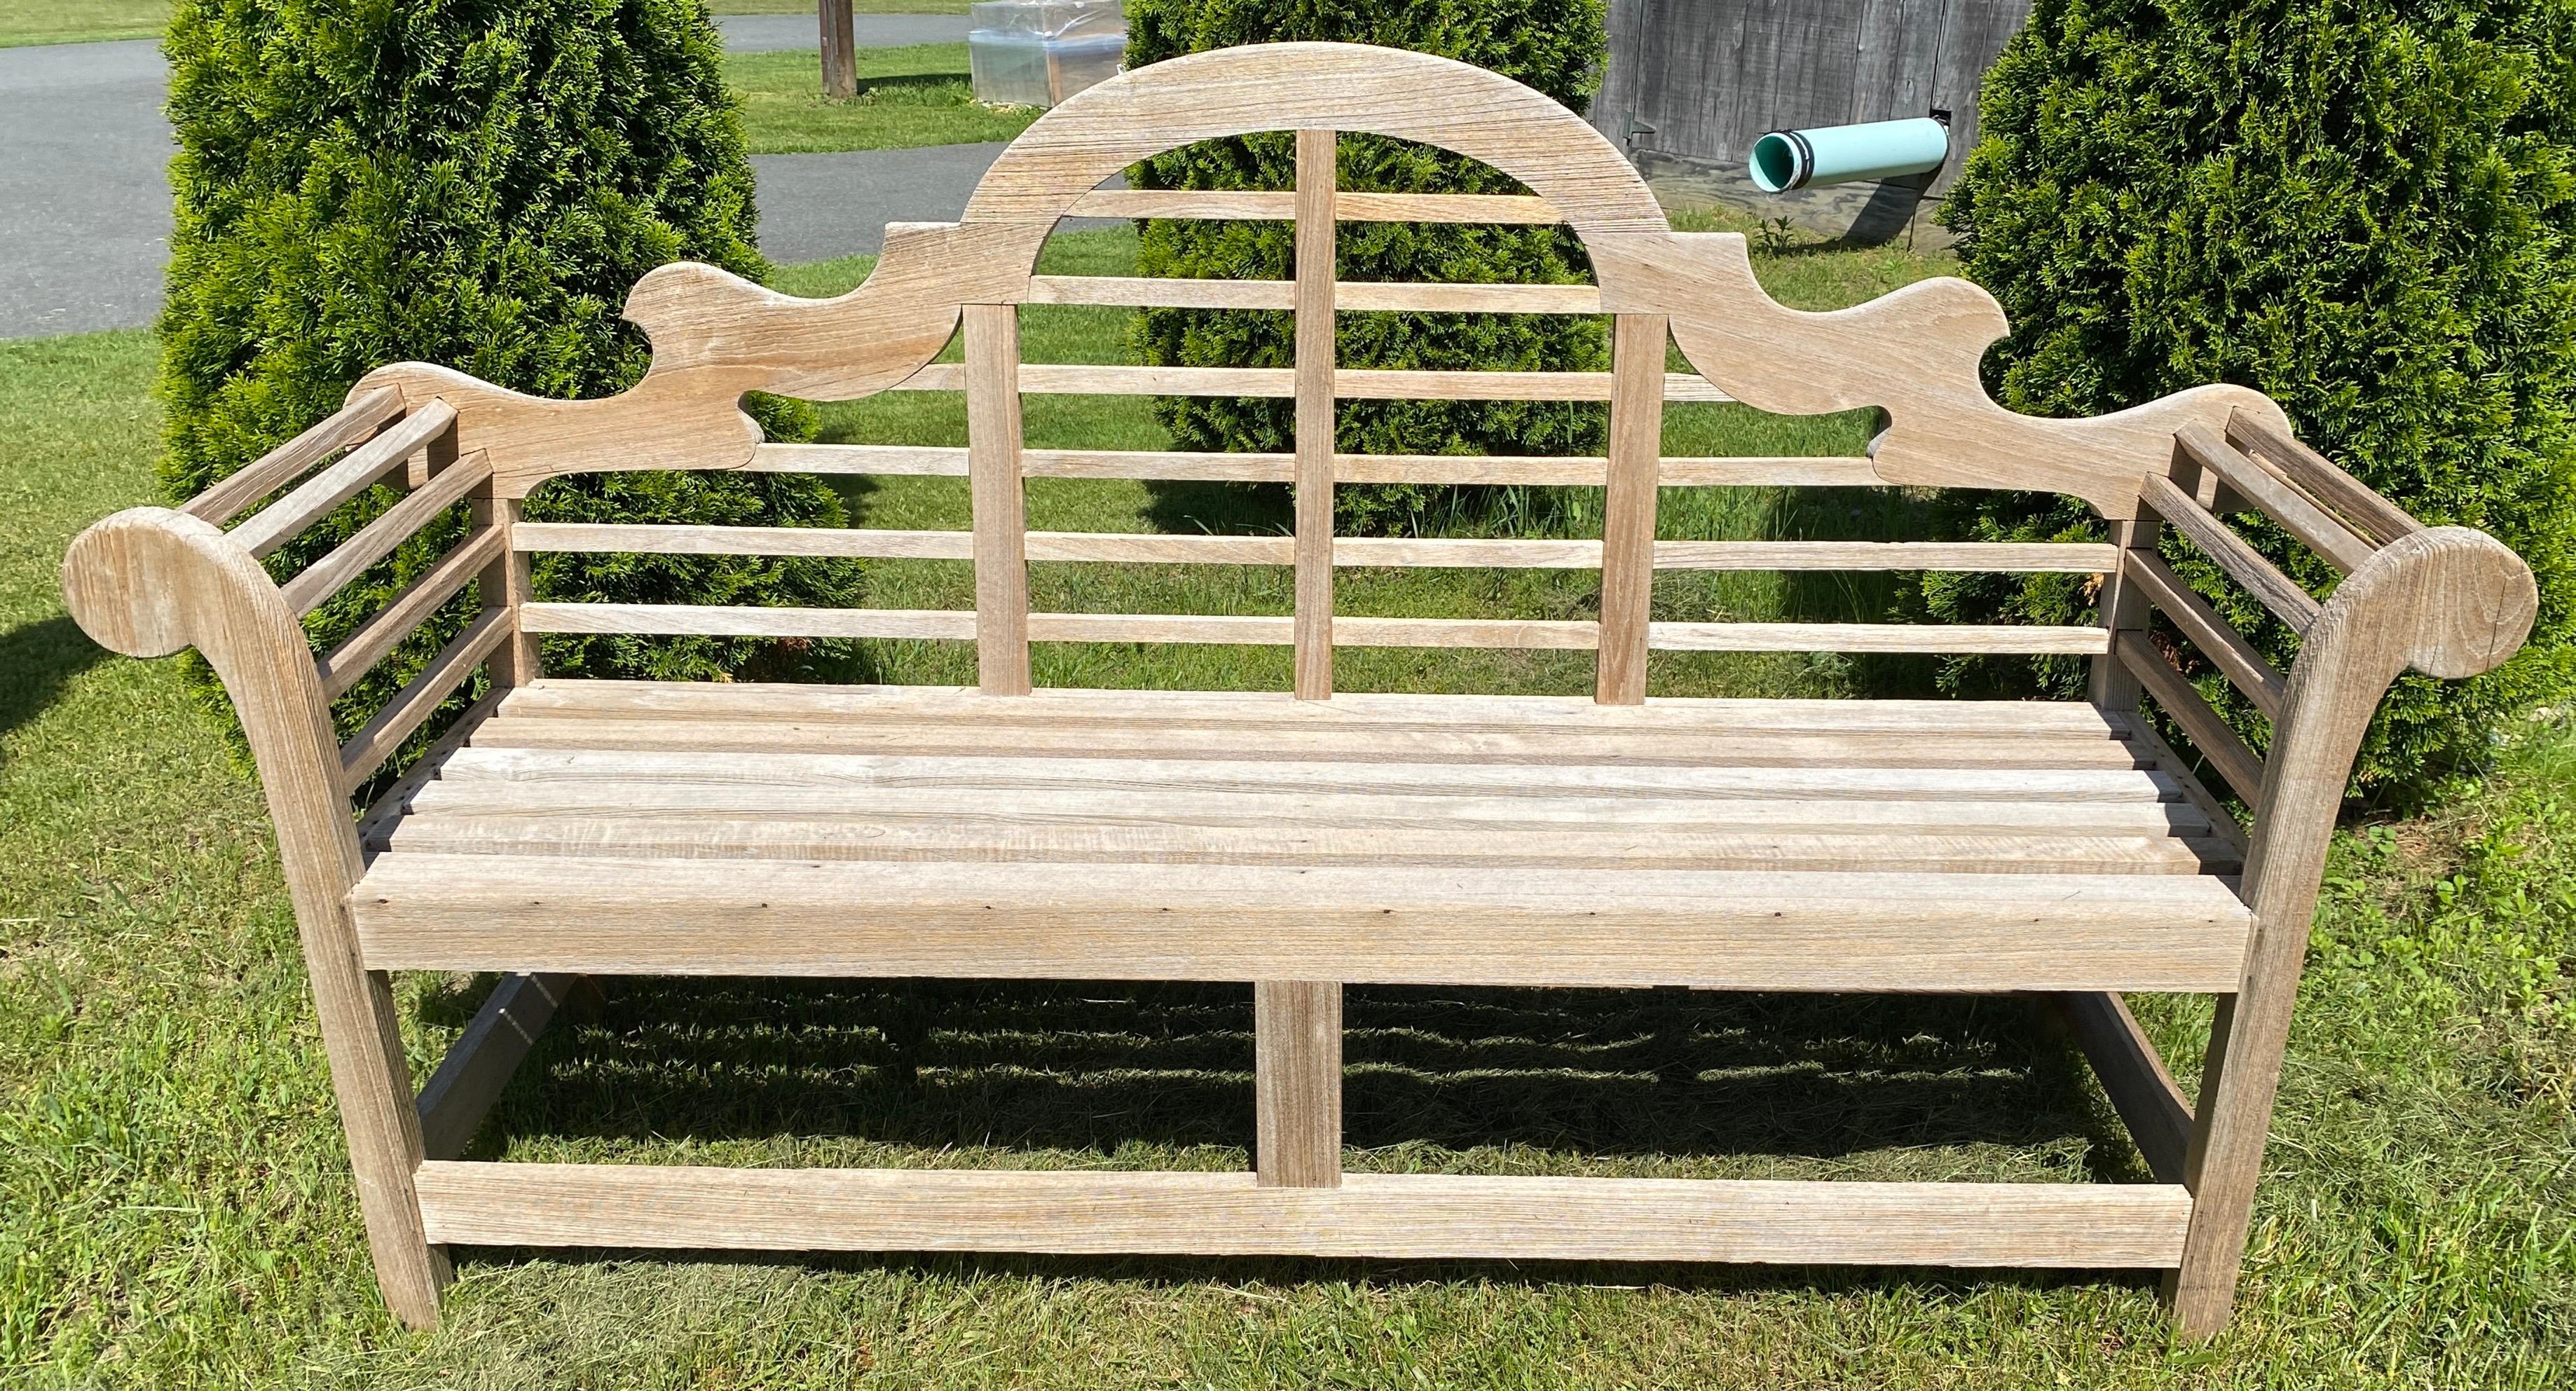 A fine vintage Lutyens style English garden bench, featuring a high-arched back for comfort and graceful rolled arms - an overall look of elegance for outdoor or indoor garden, garden room, or patio. This bench has been newly cleaned, leave it out